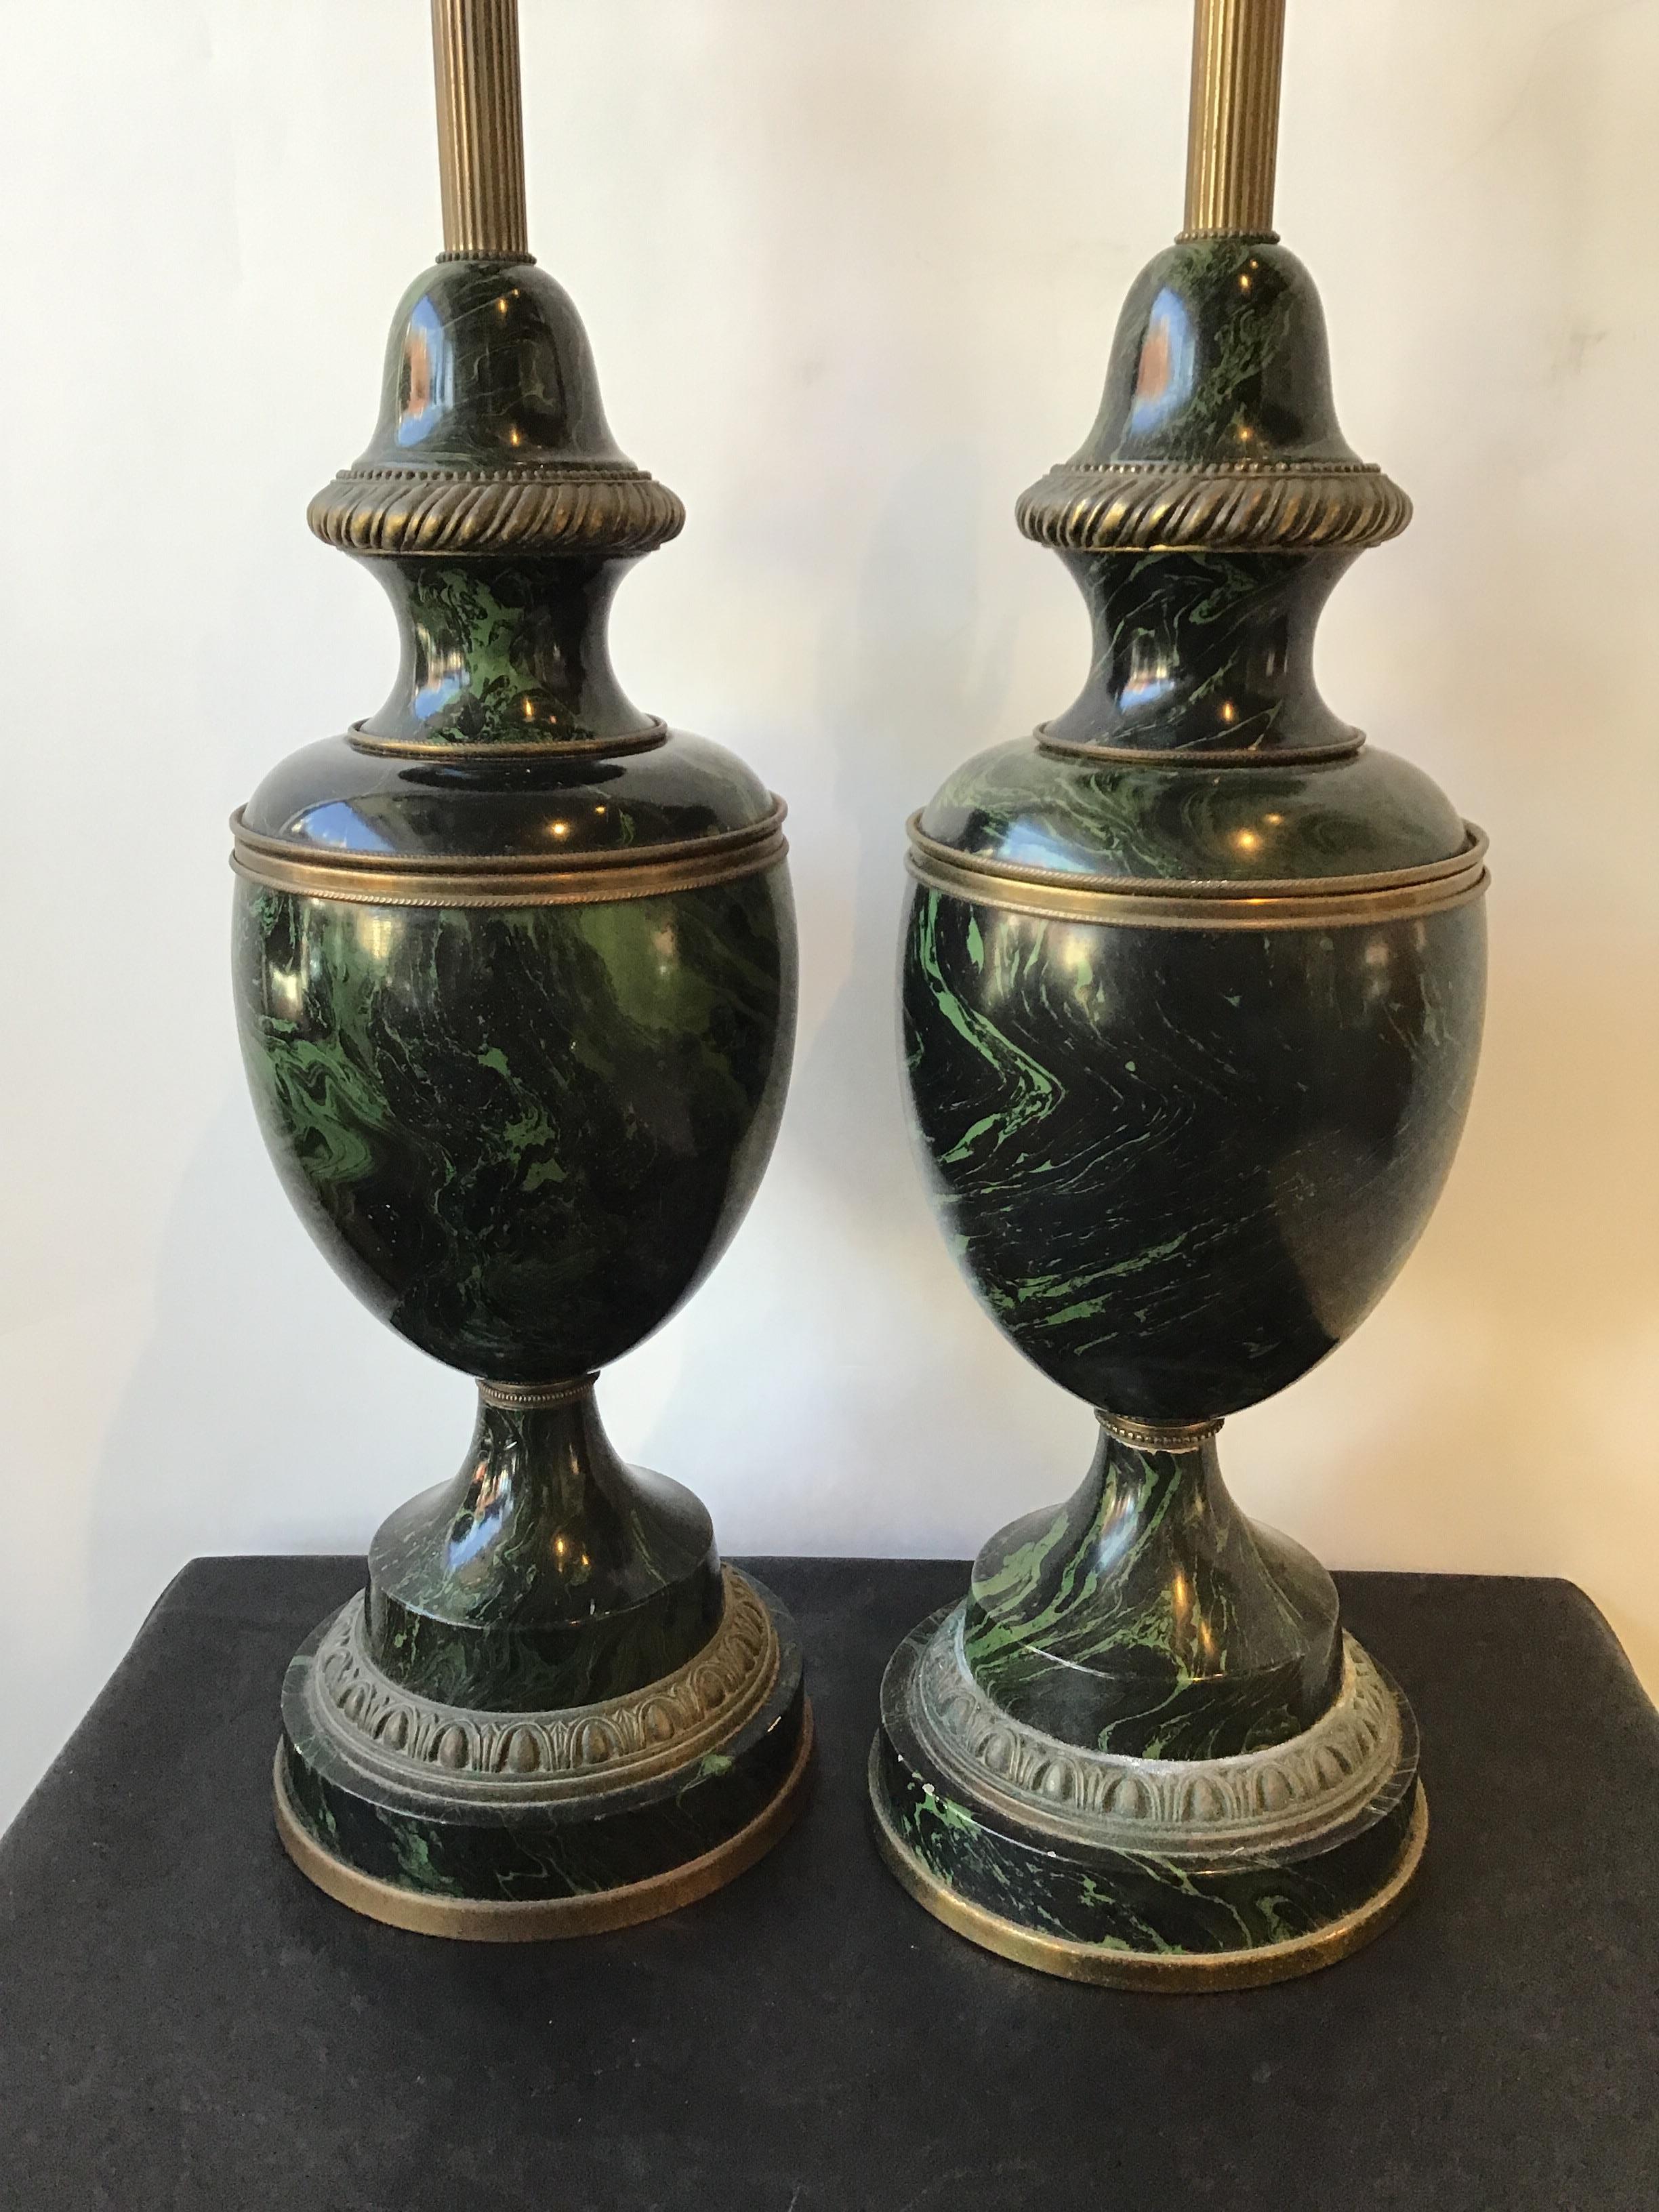 Pair of 1950s classical wood lamps with faux marble finish and brass accents.